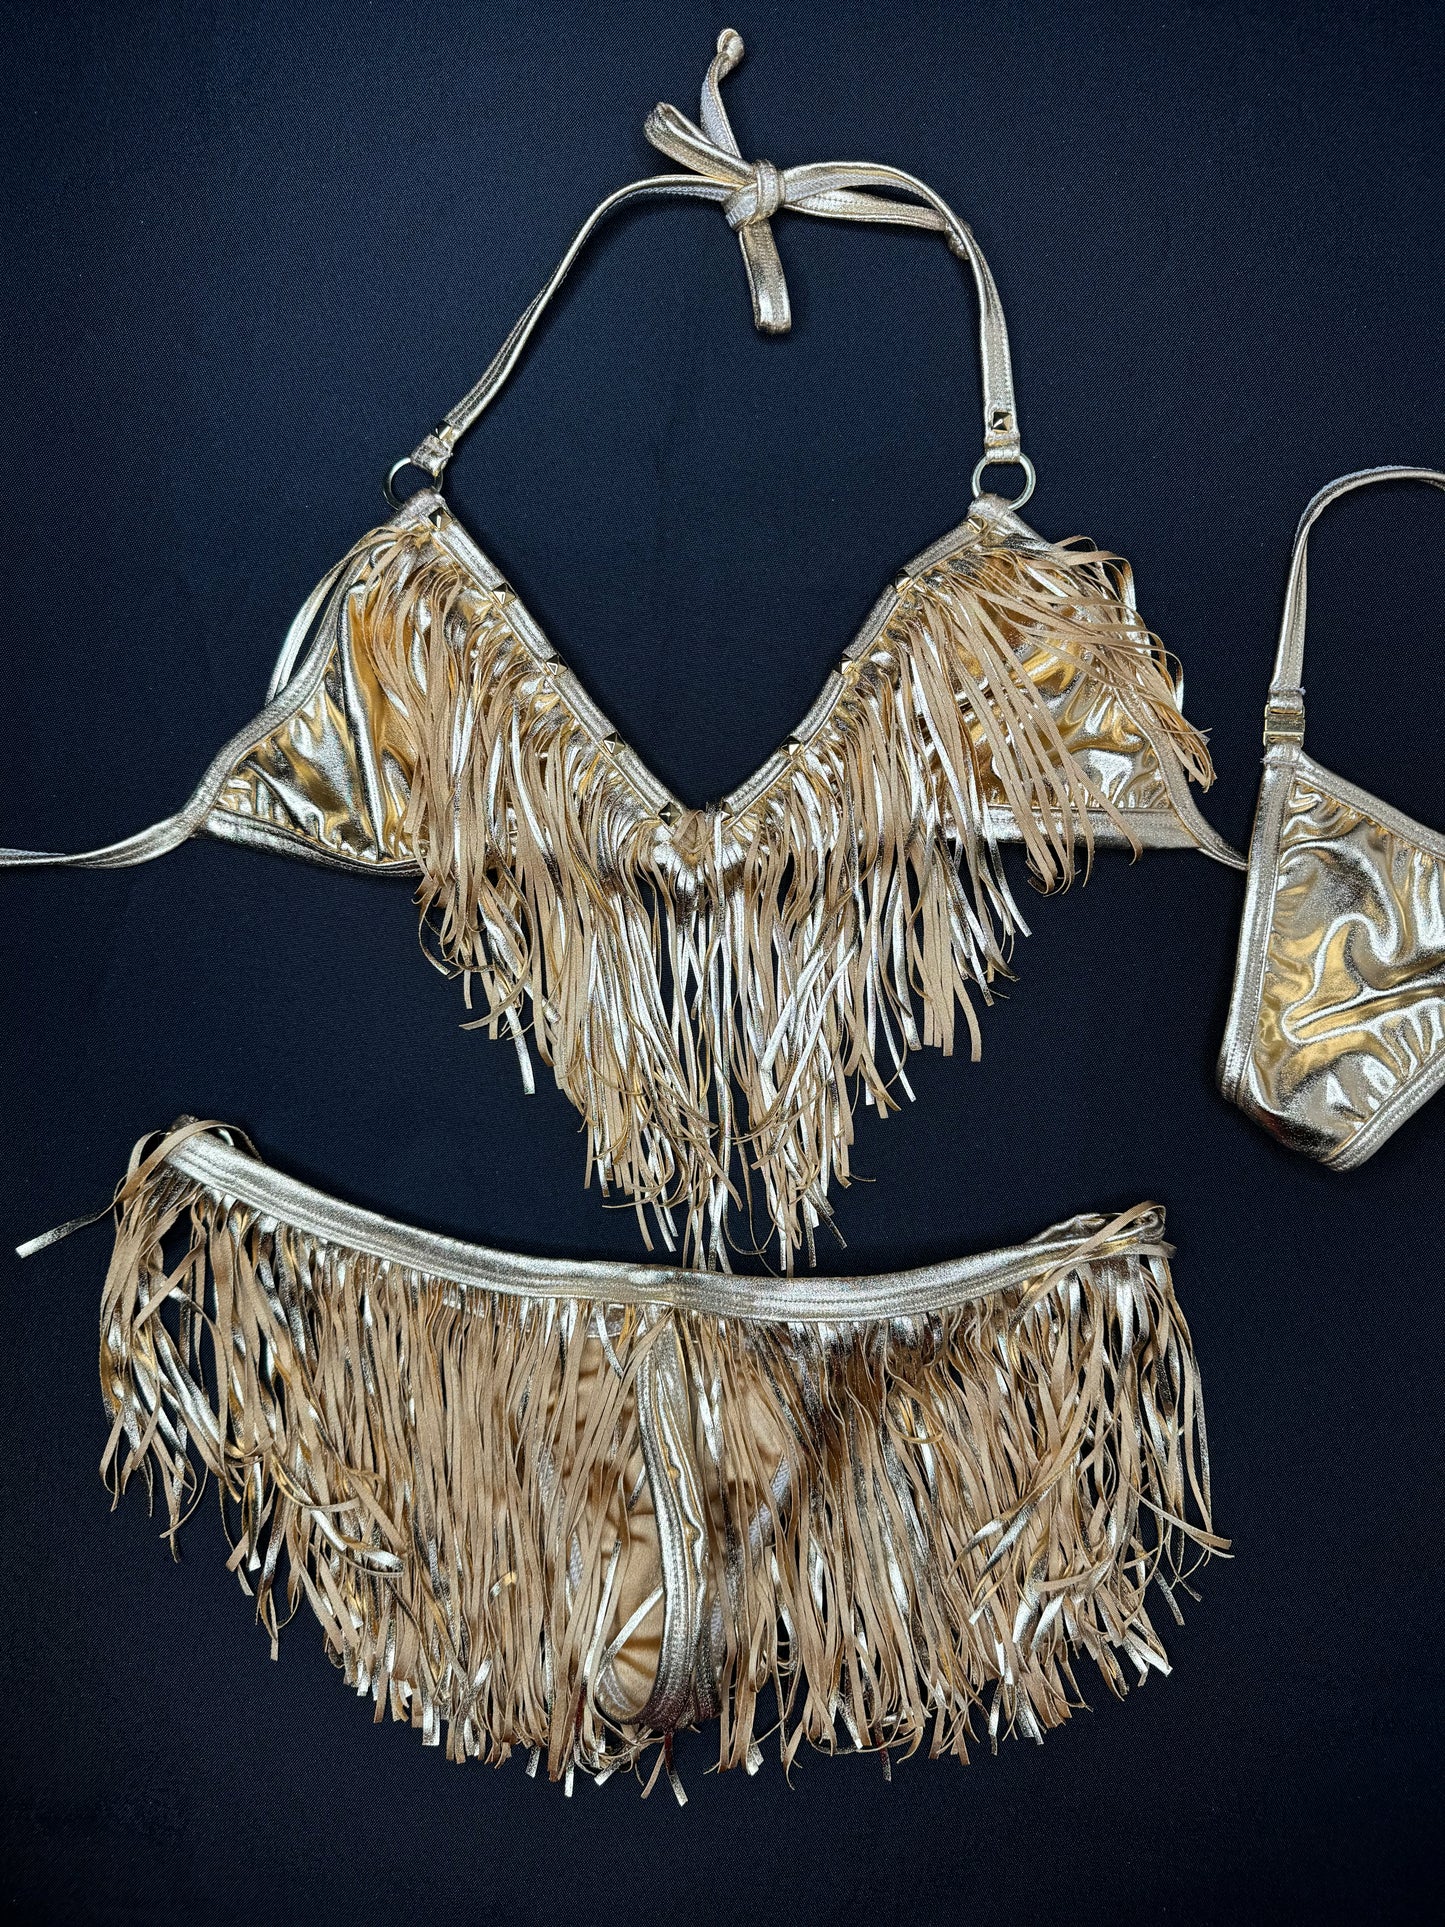 Gold Fringe Two-Piece Bikini Lingerie Outfit